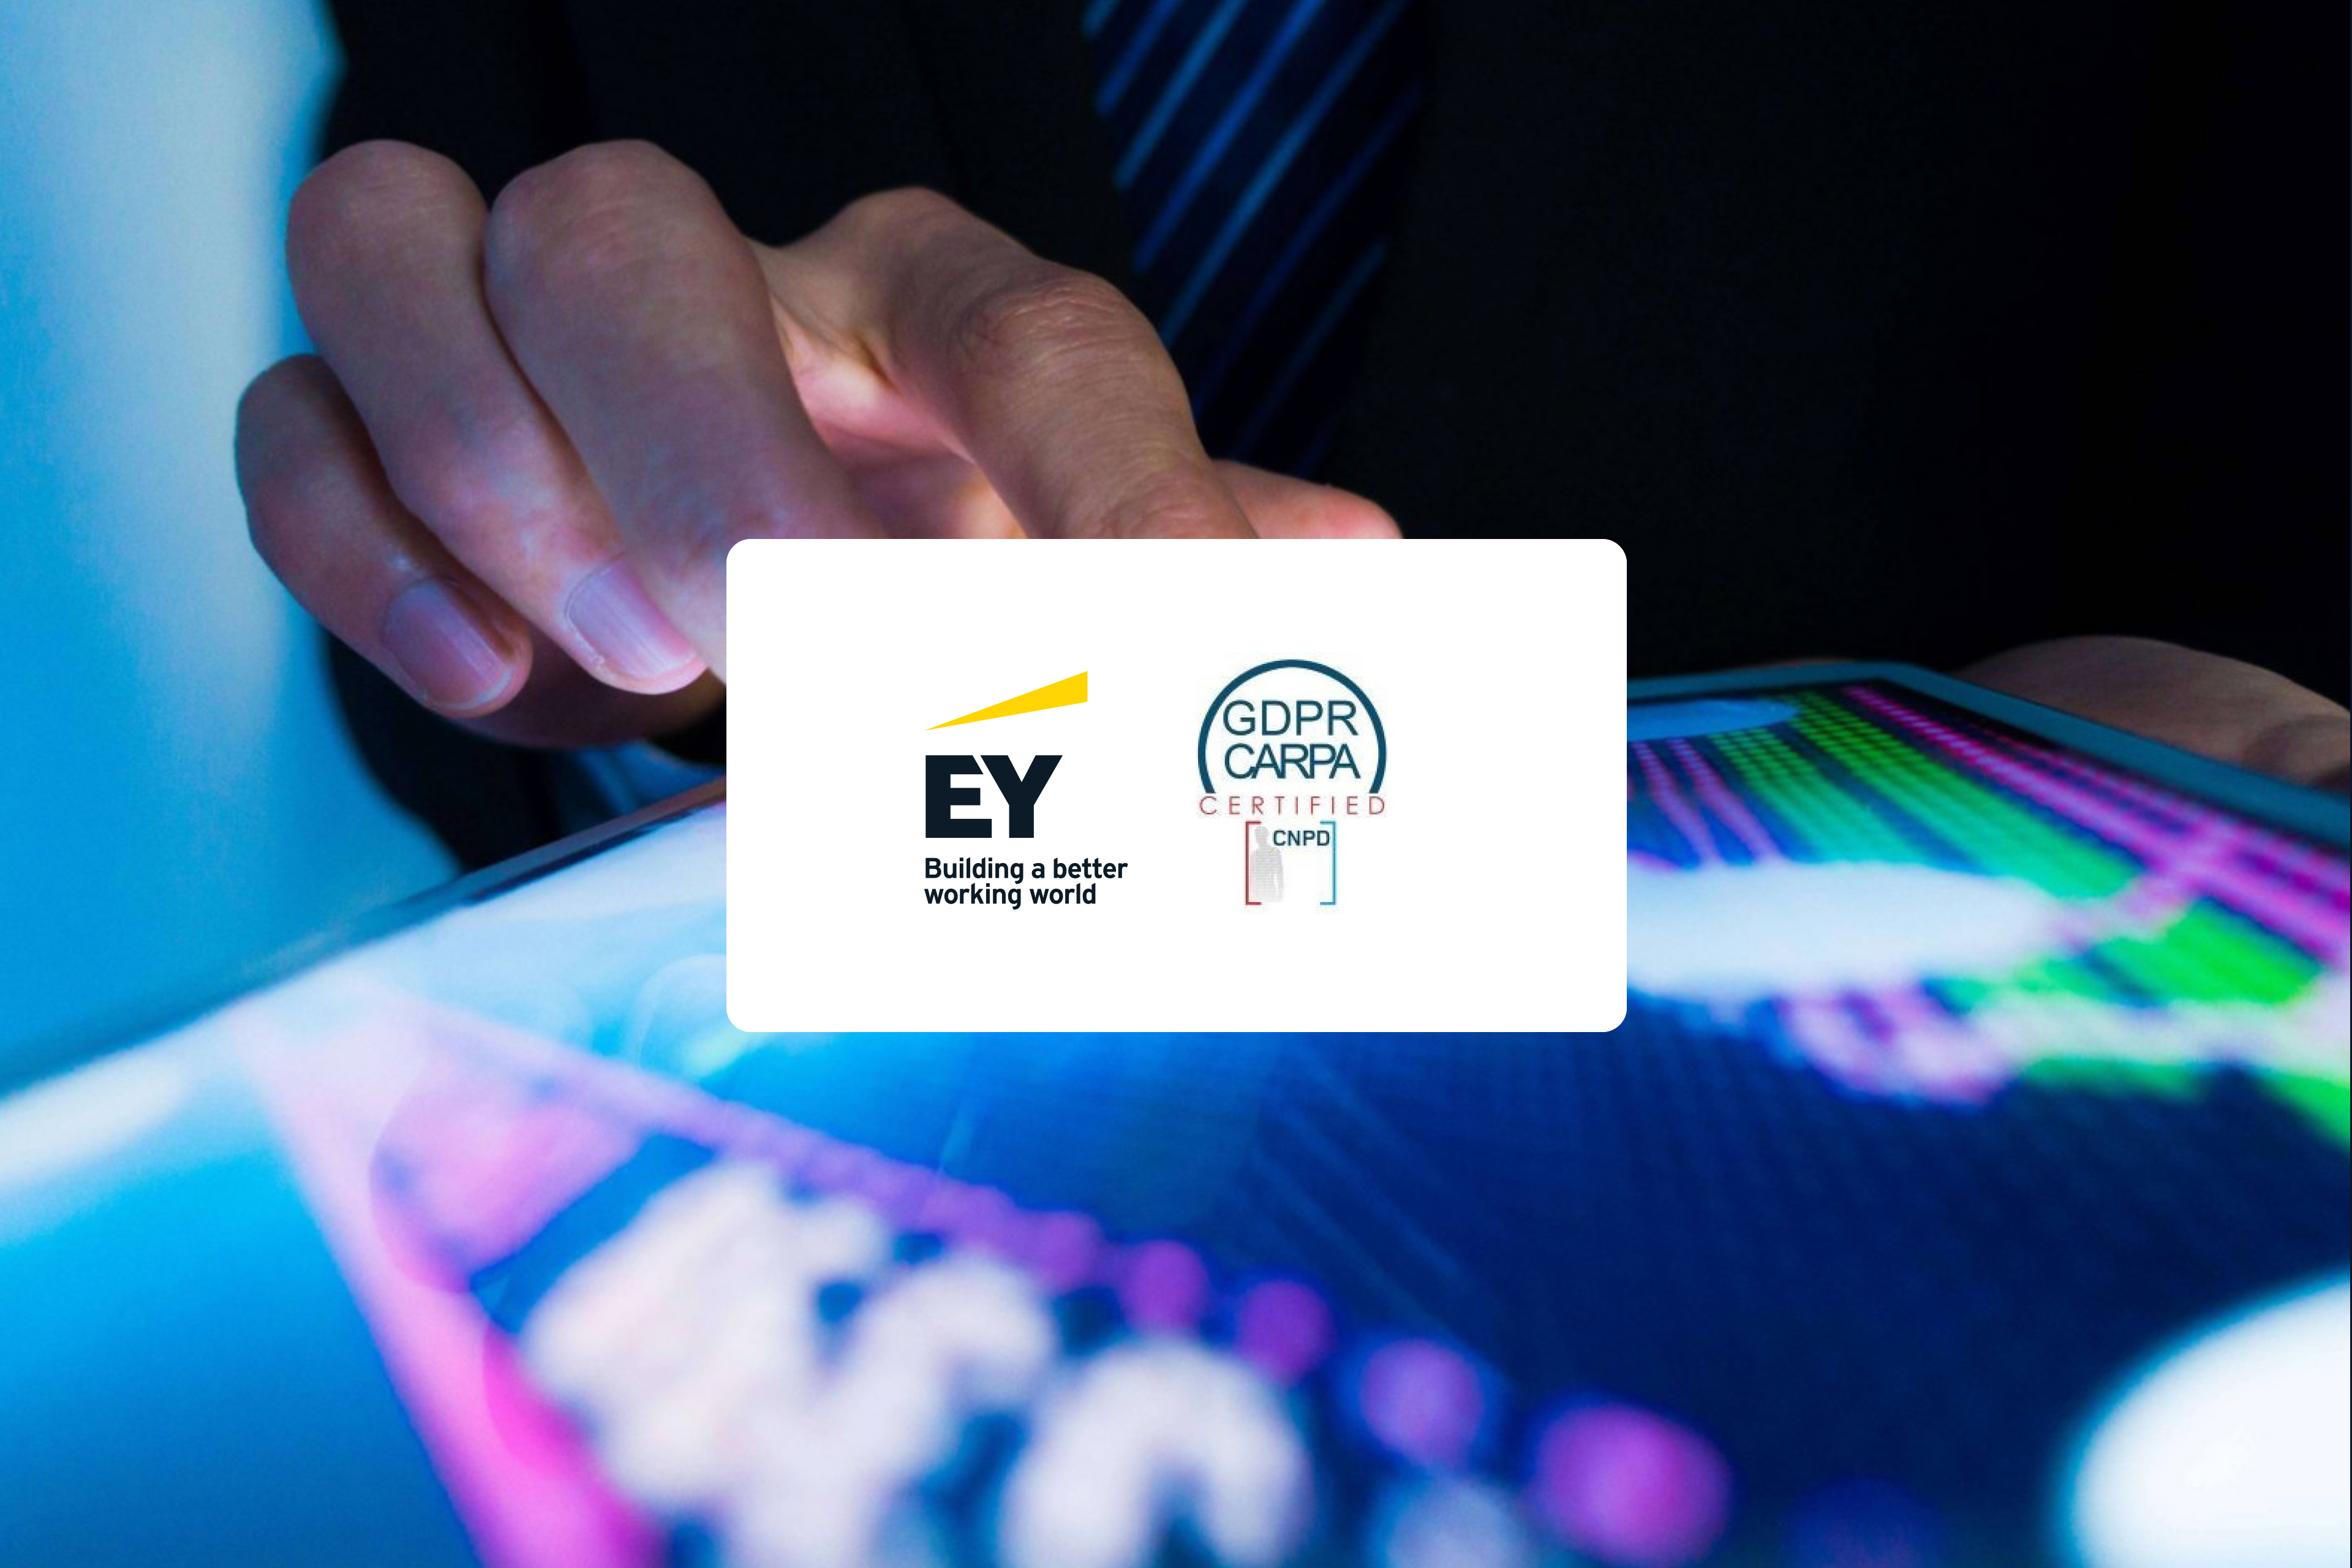 EY the first European company to issue GPDR certifications